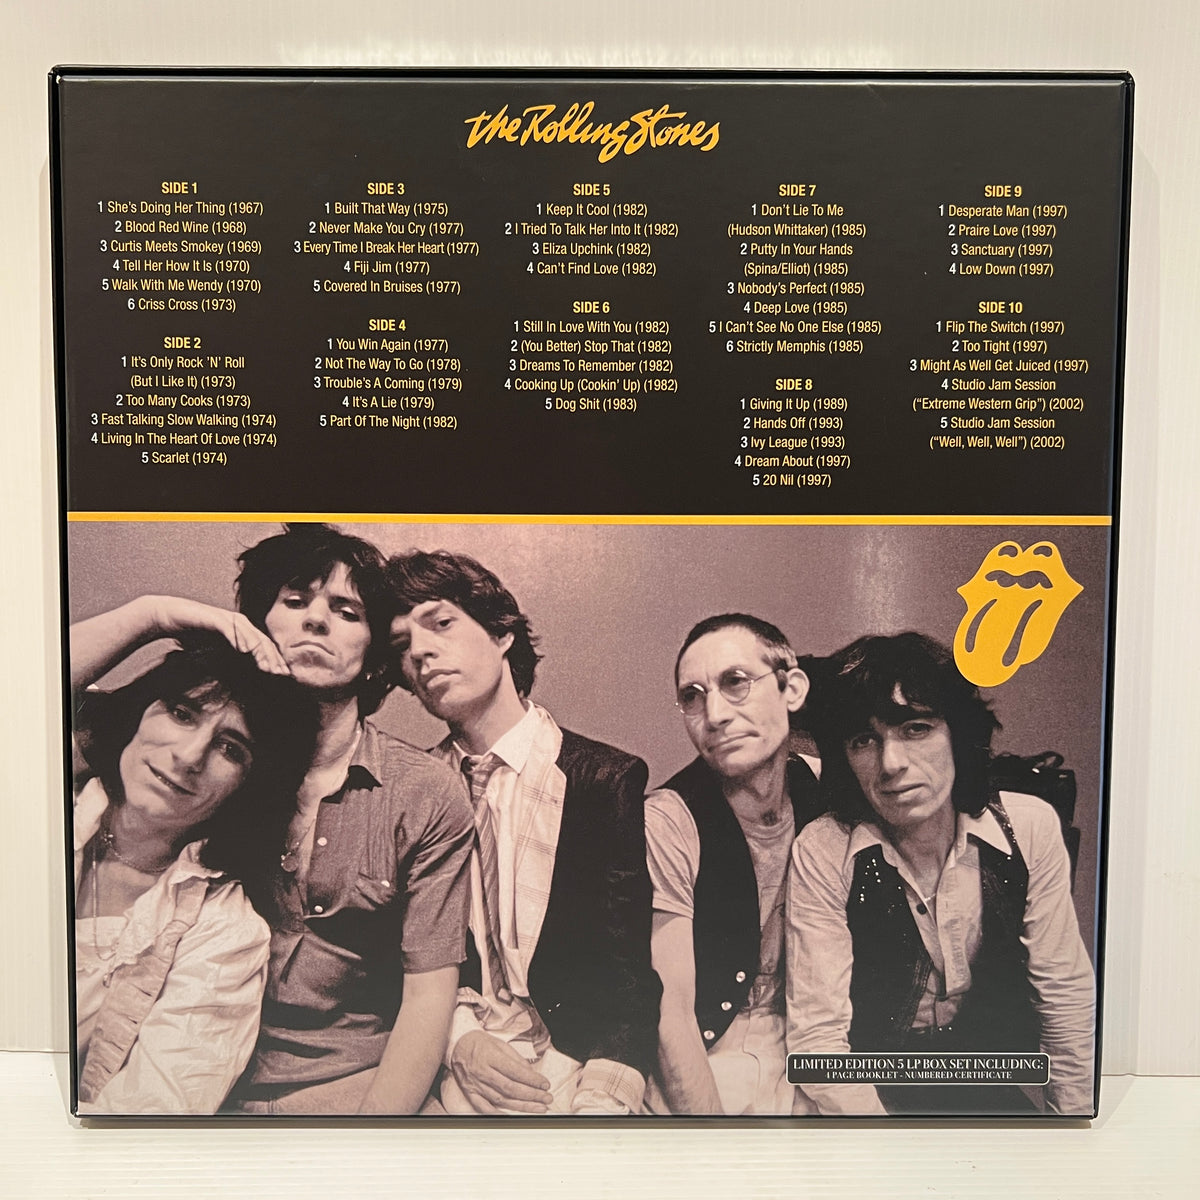 The Rolling Stones - Trawlin' the Vaults. Studio Gems 1967/2002